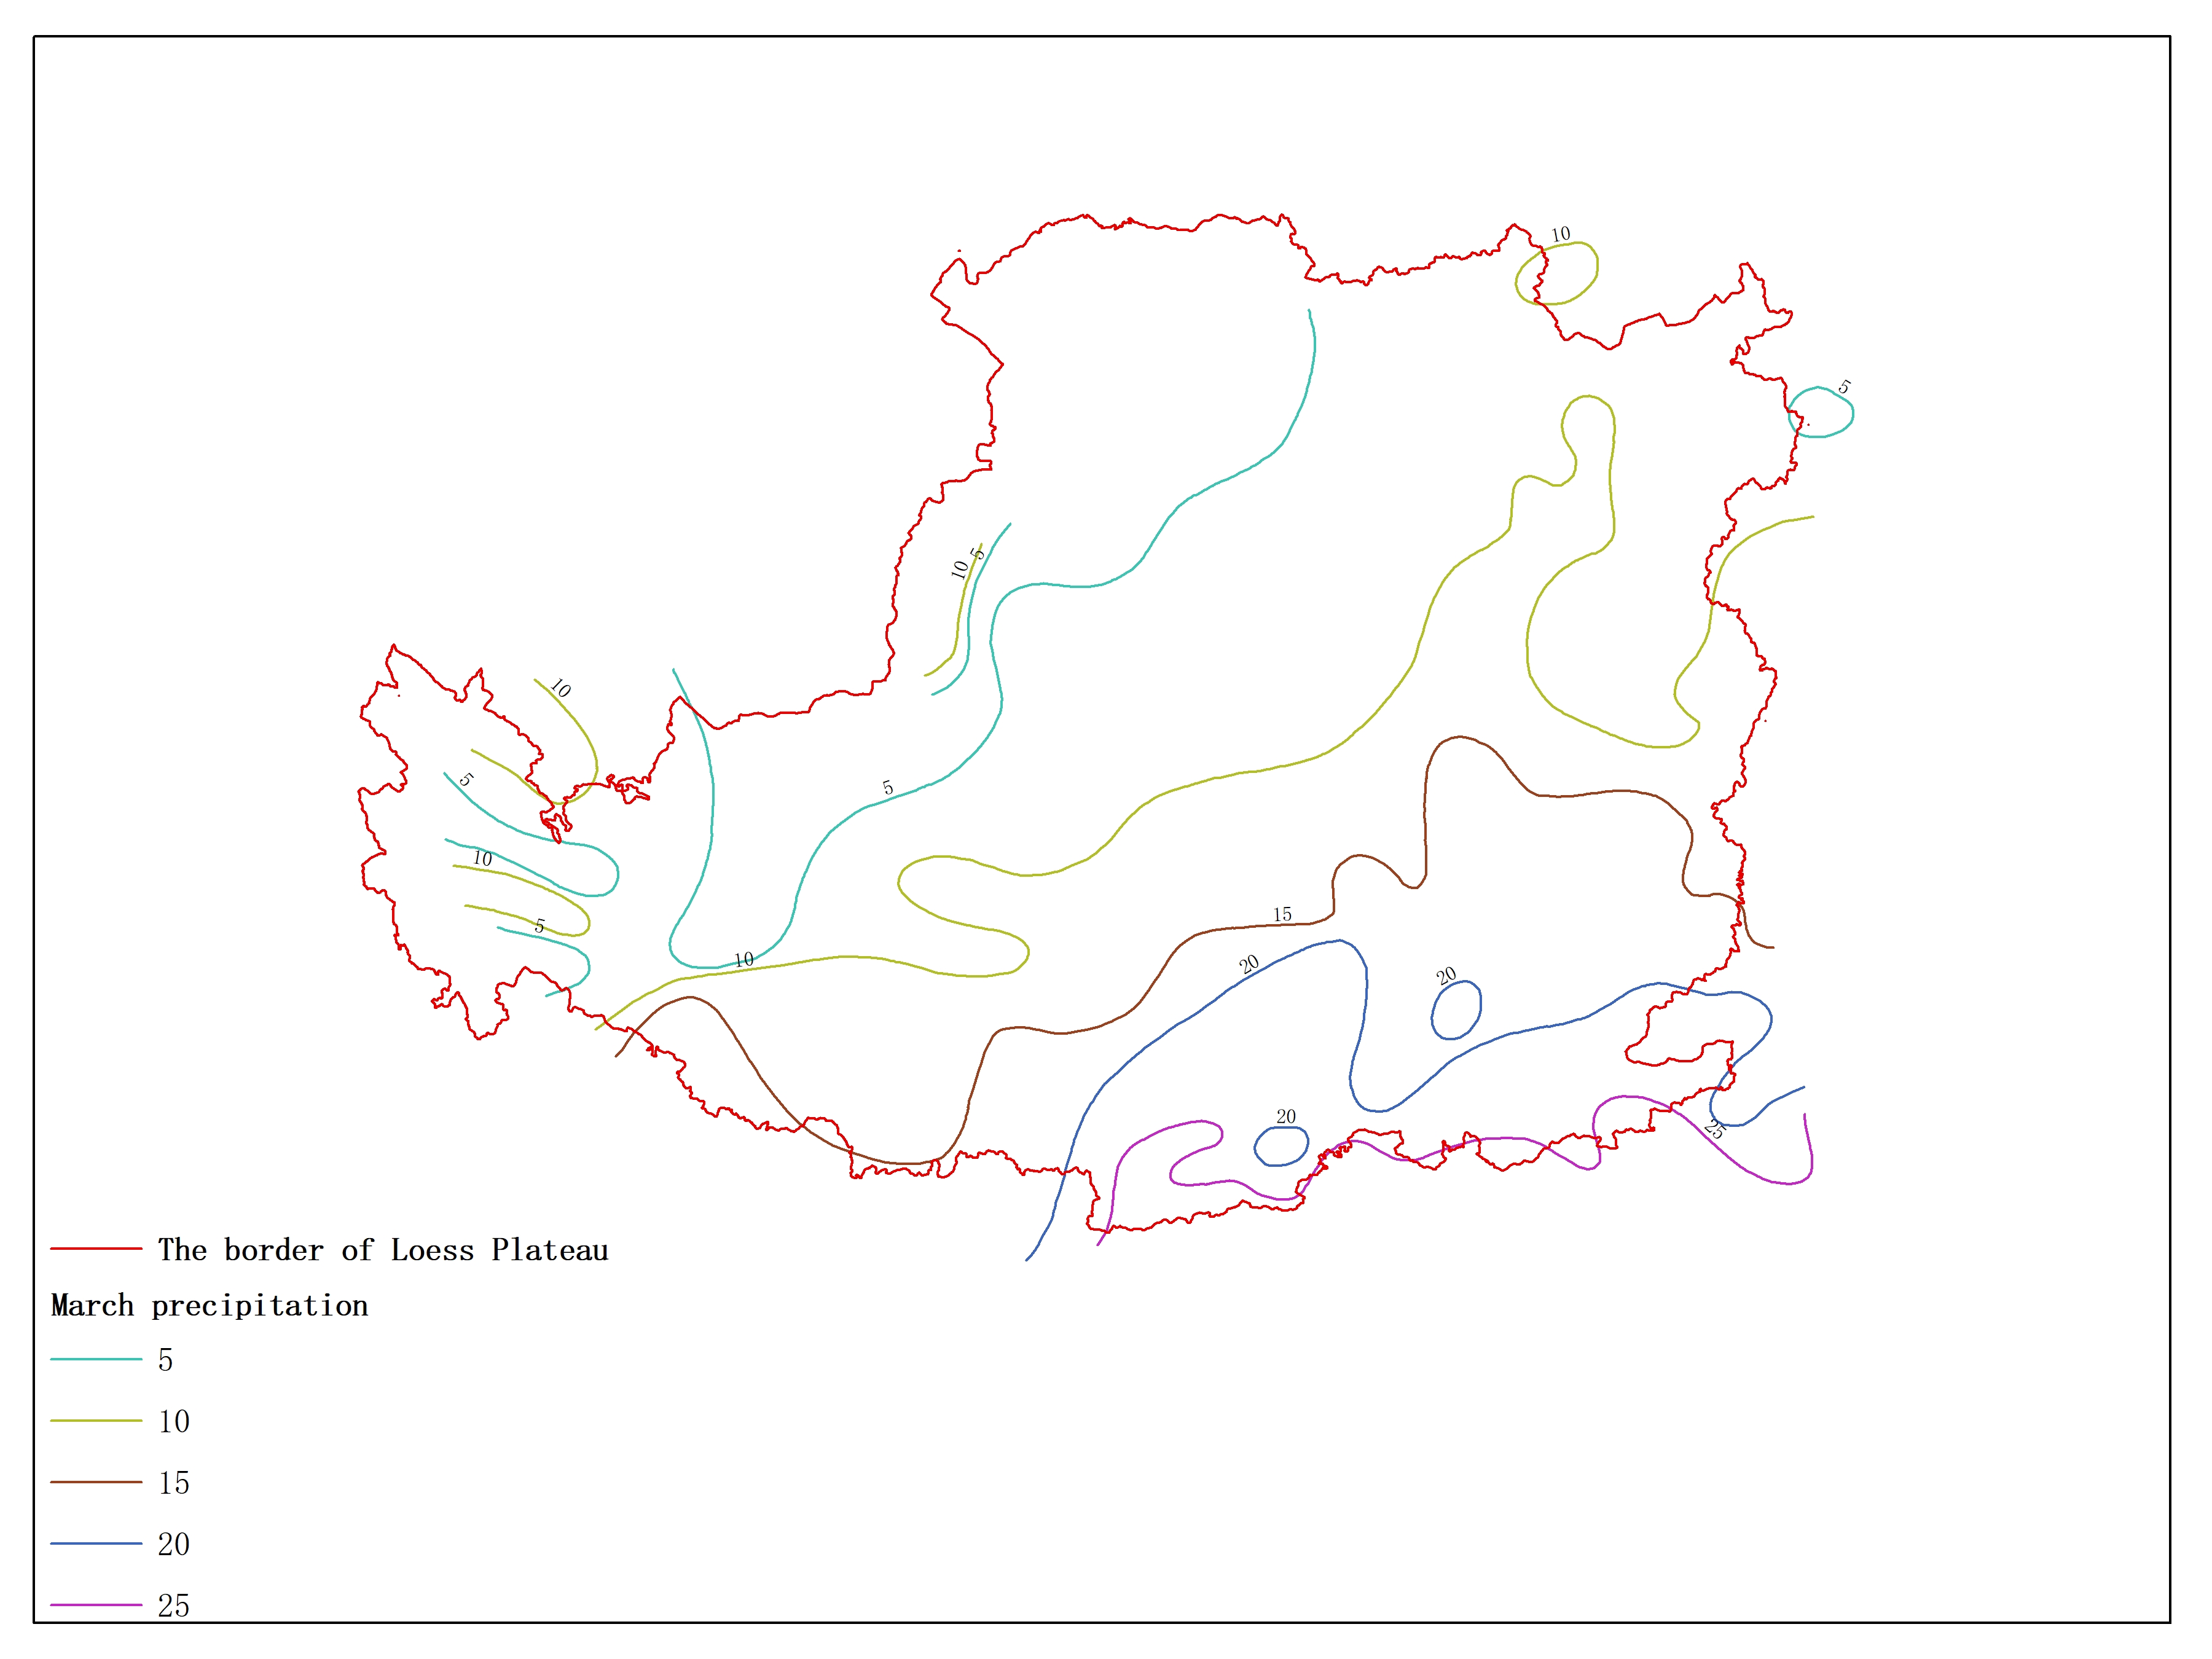 Agricultural climate resource atlas of Loess Plateau-March precipitation